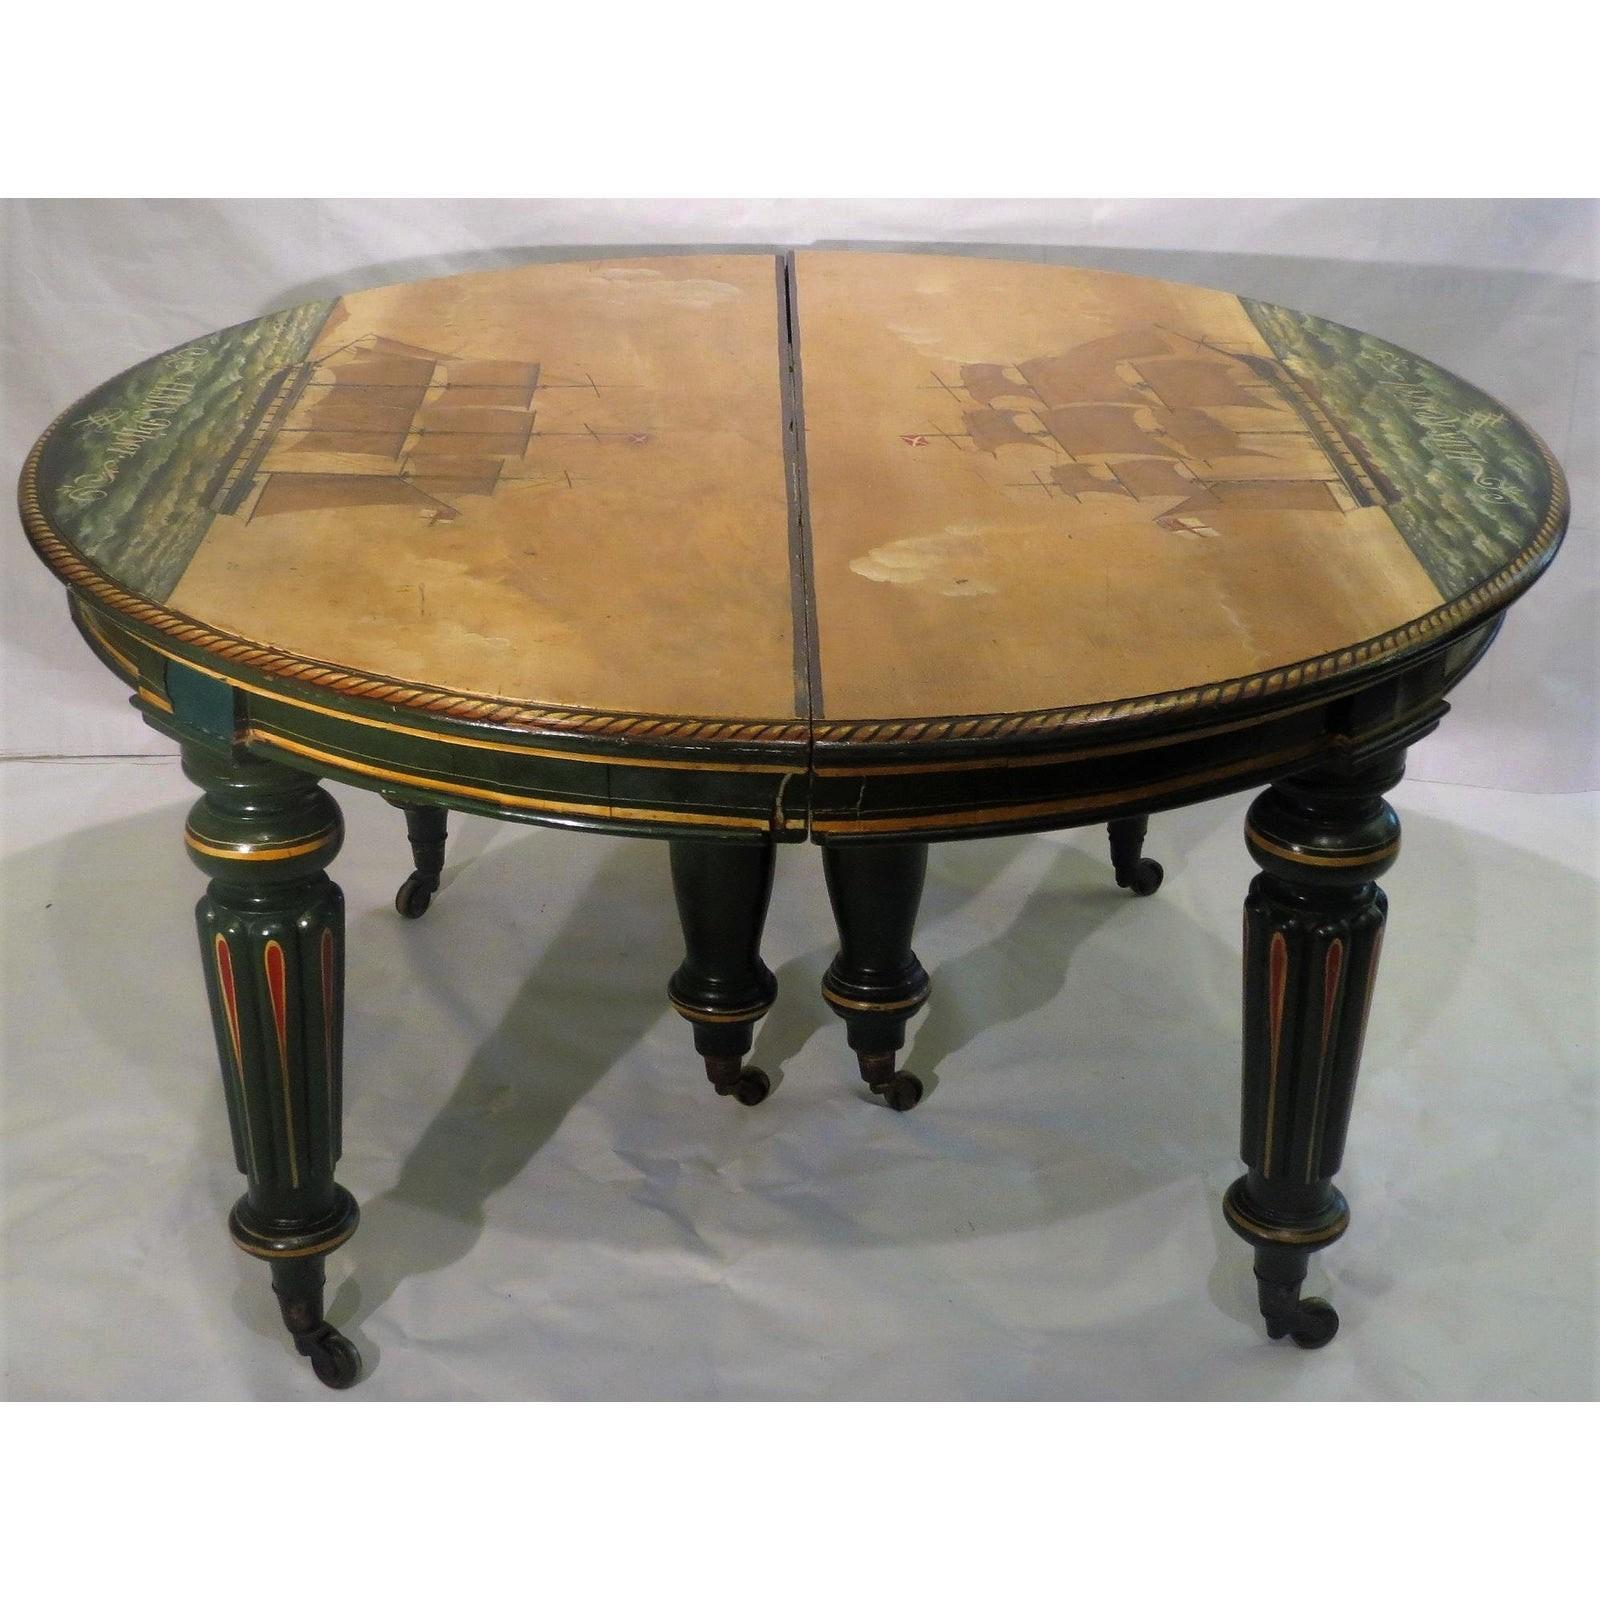 Antique Regency period breakfast table with nautical ship paintings. Excellent for a Nantucket design statement. Also can be used as demilune console tables. It is a very unusual example and features elaborate nautical paintings of ships at sea. The